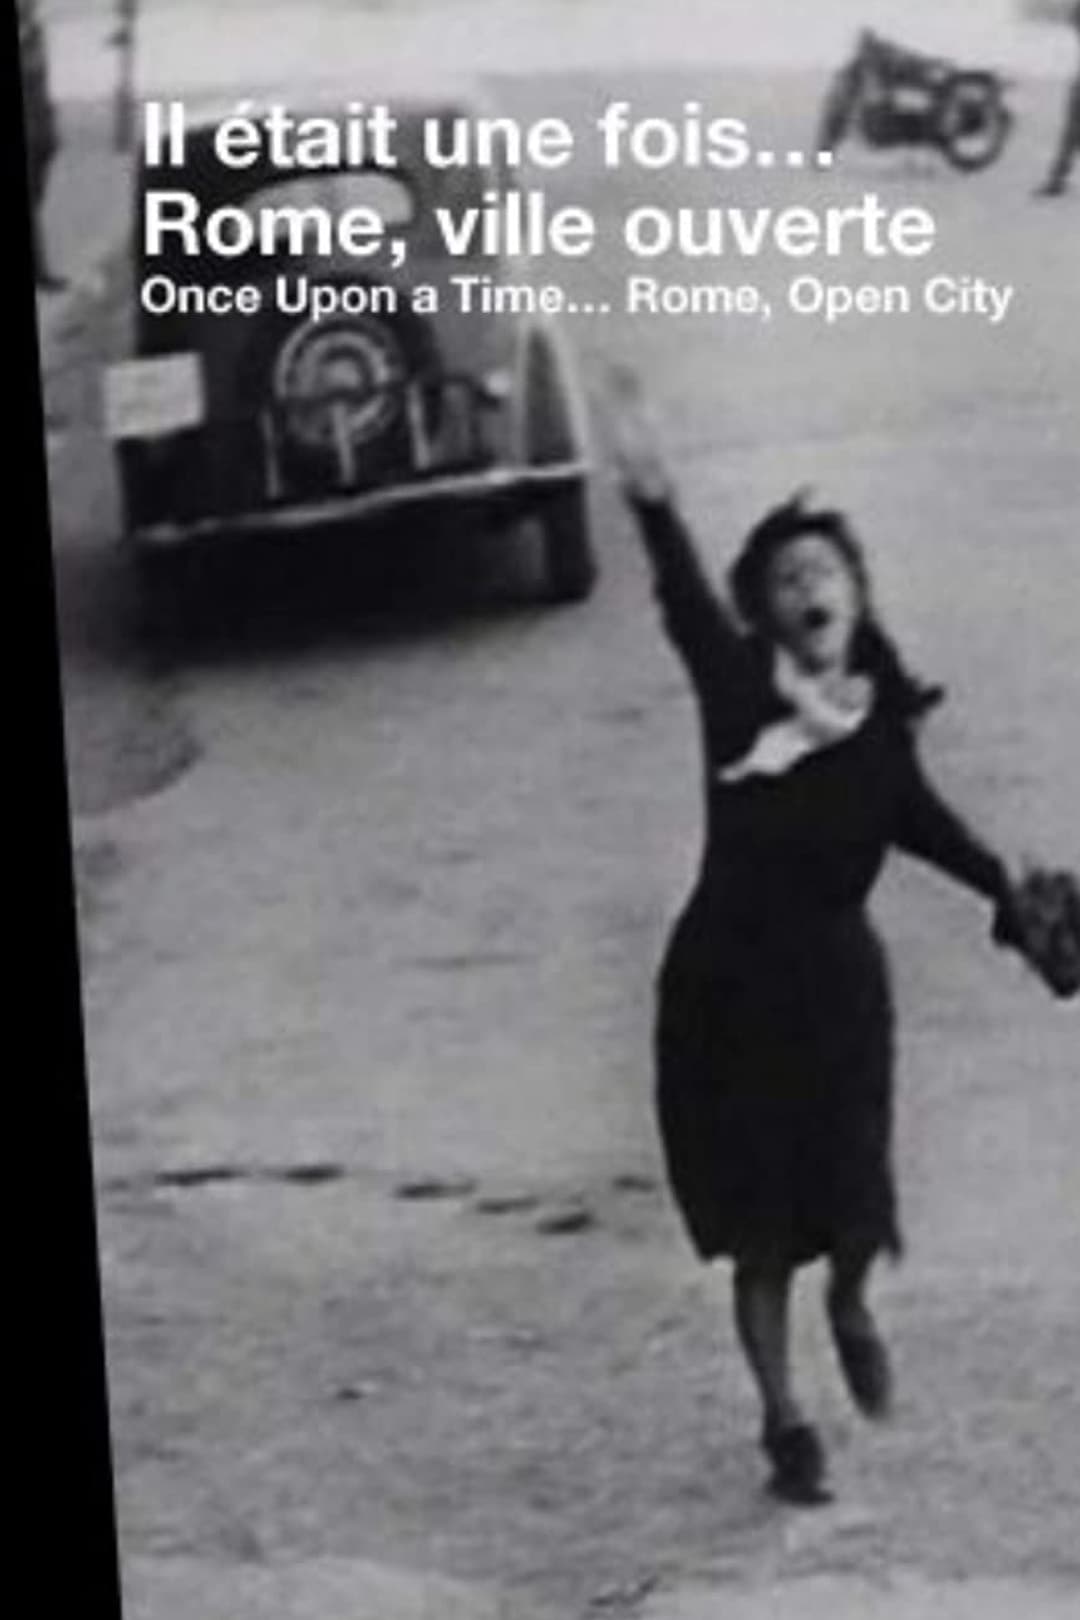 Once Upon a Time... 'Rome, Open City'